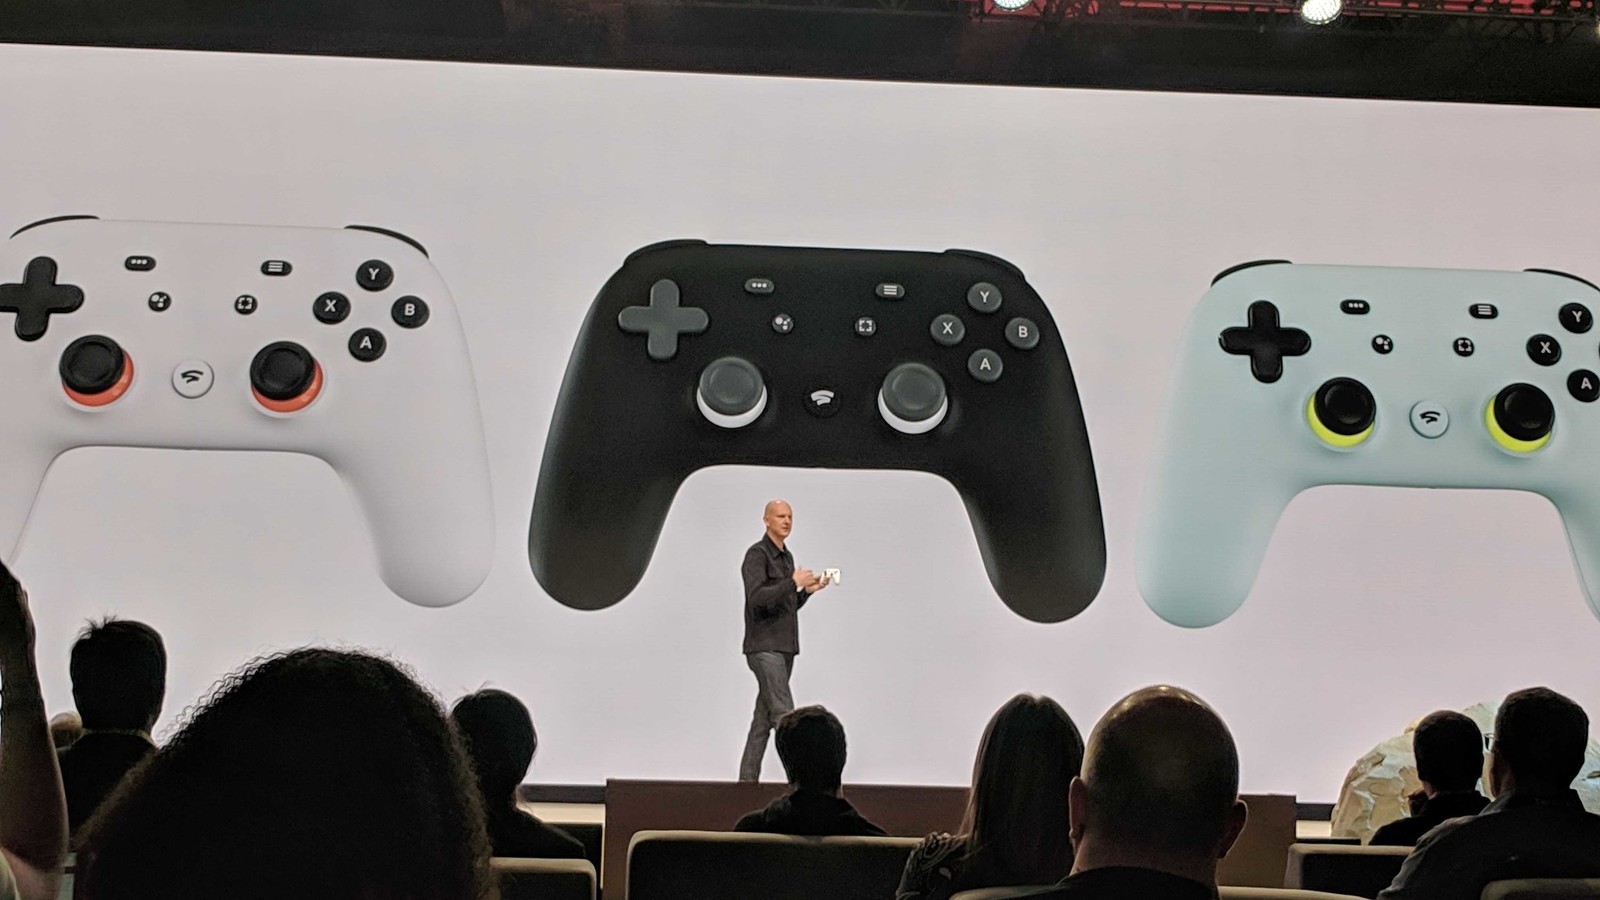 Google Plans To Implement Negative Latency To Make Stadia More